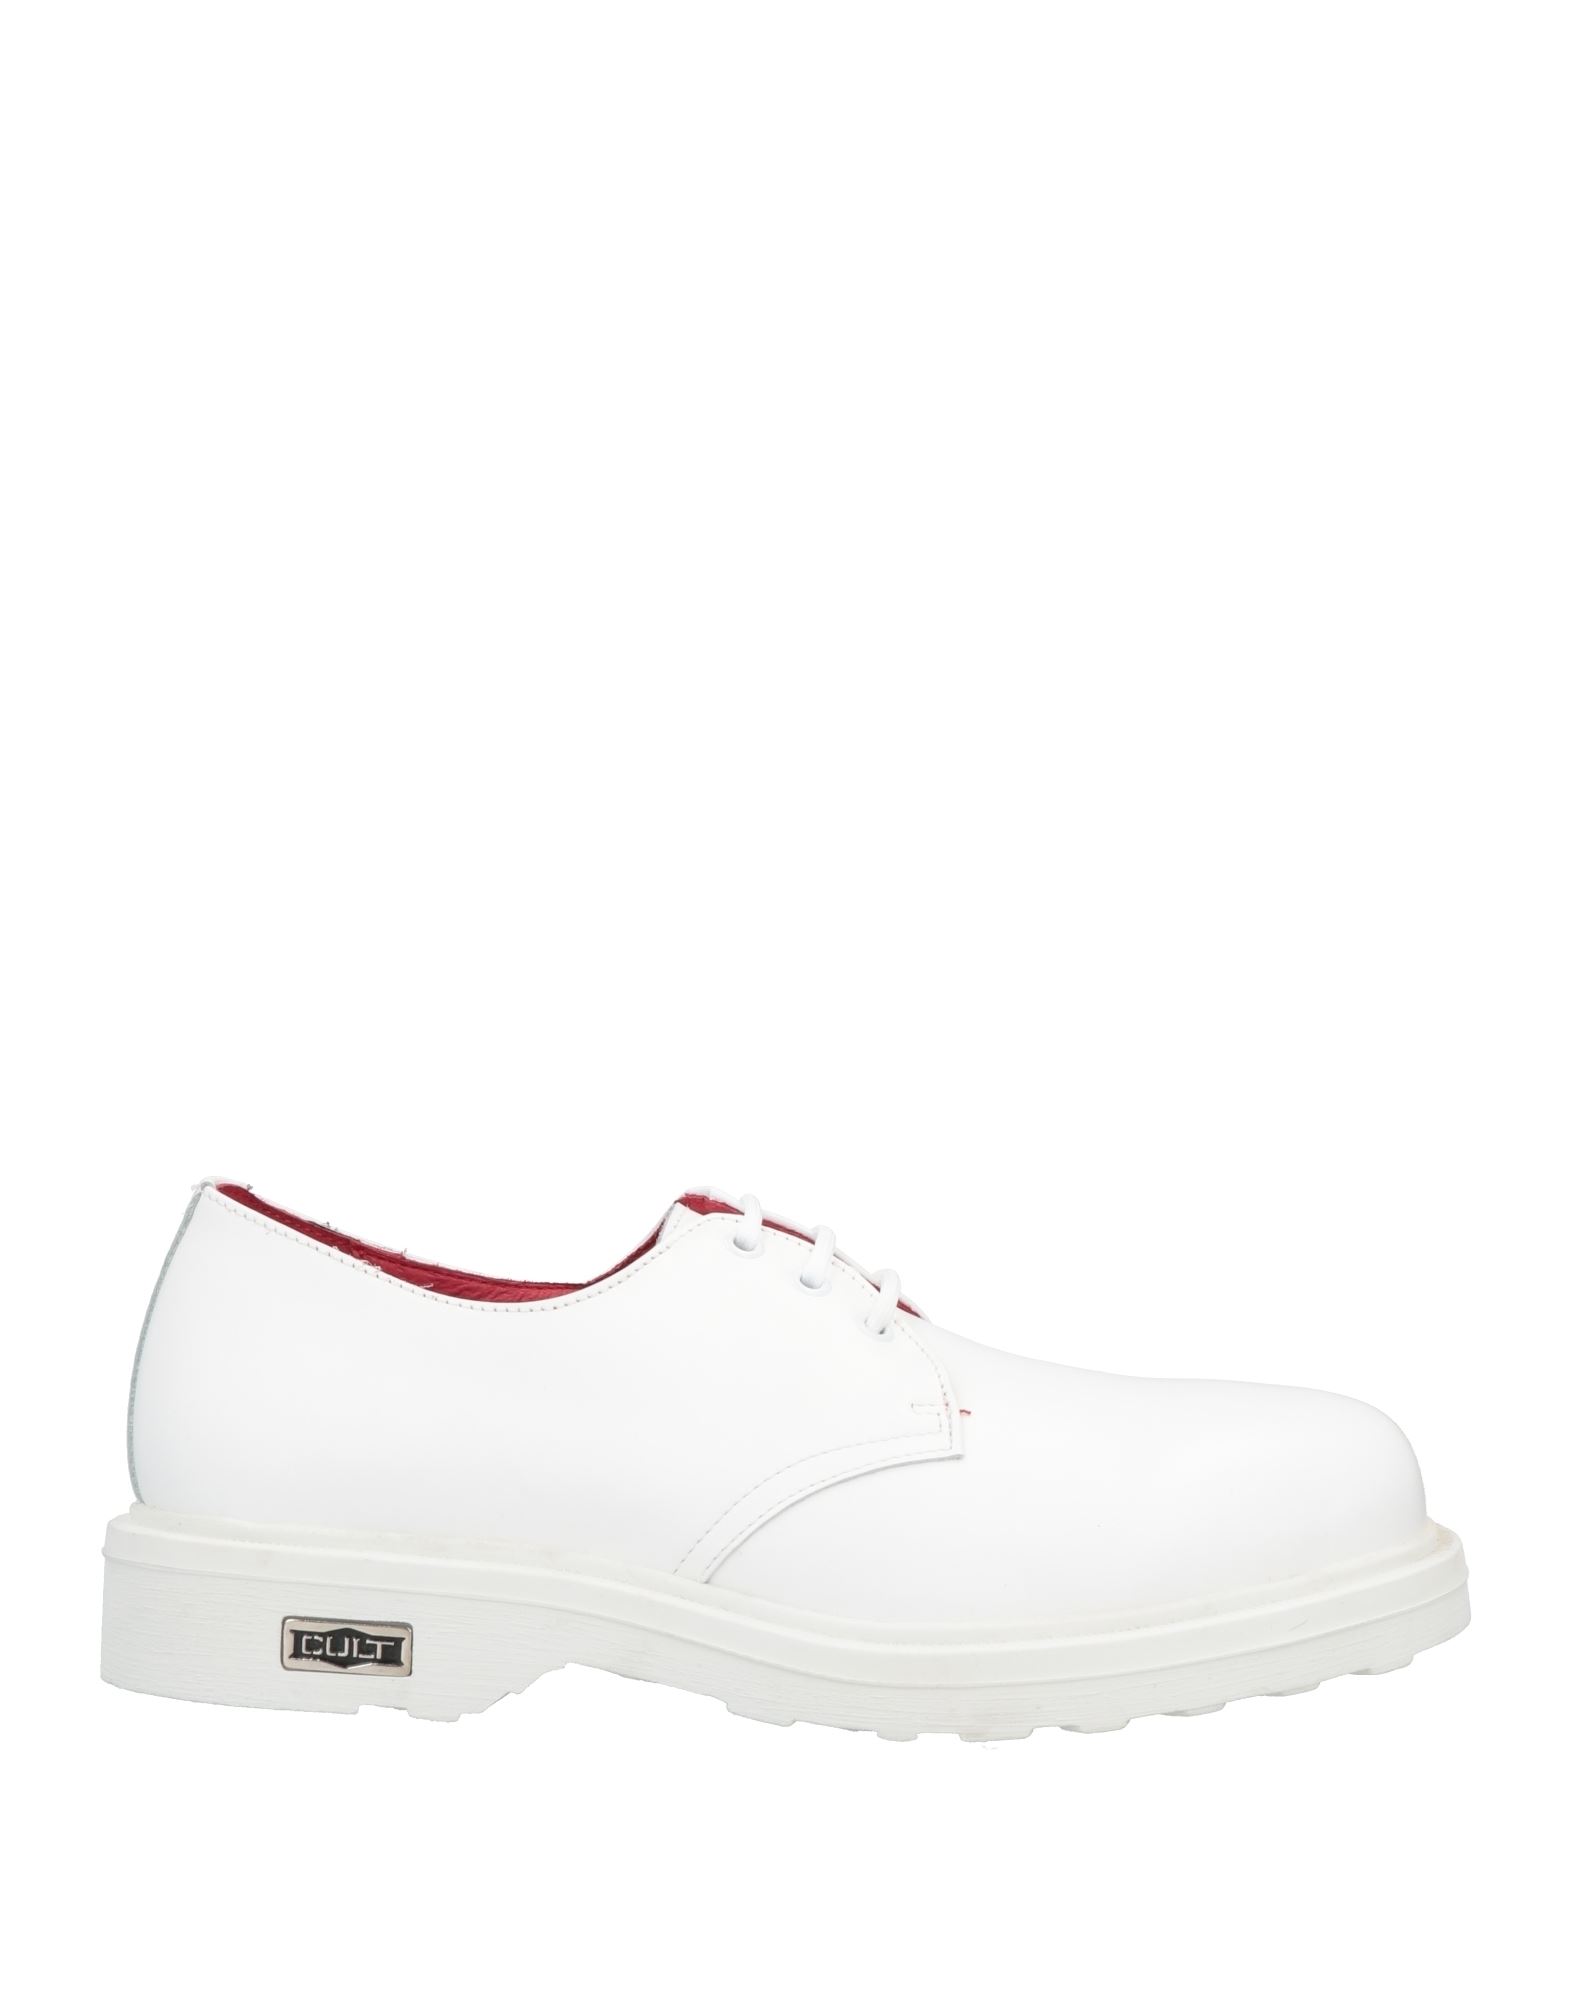 Cult Bolt Lace-up Shoes In White